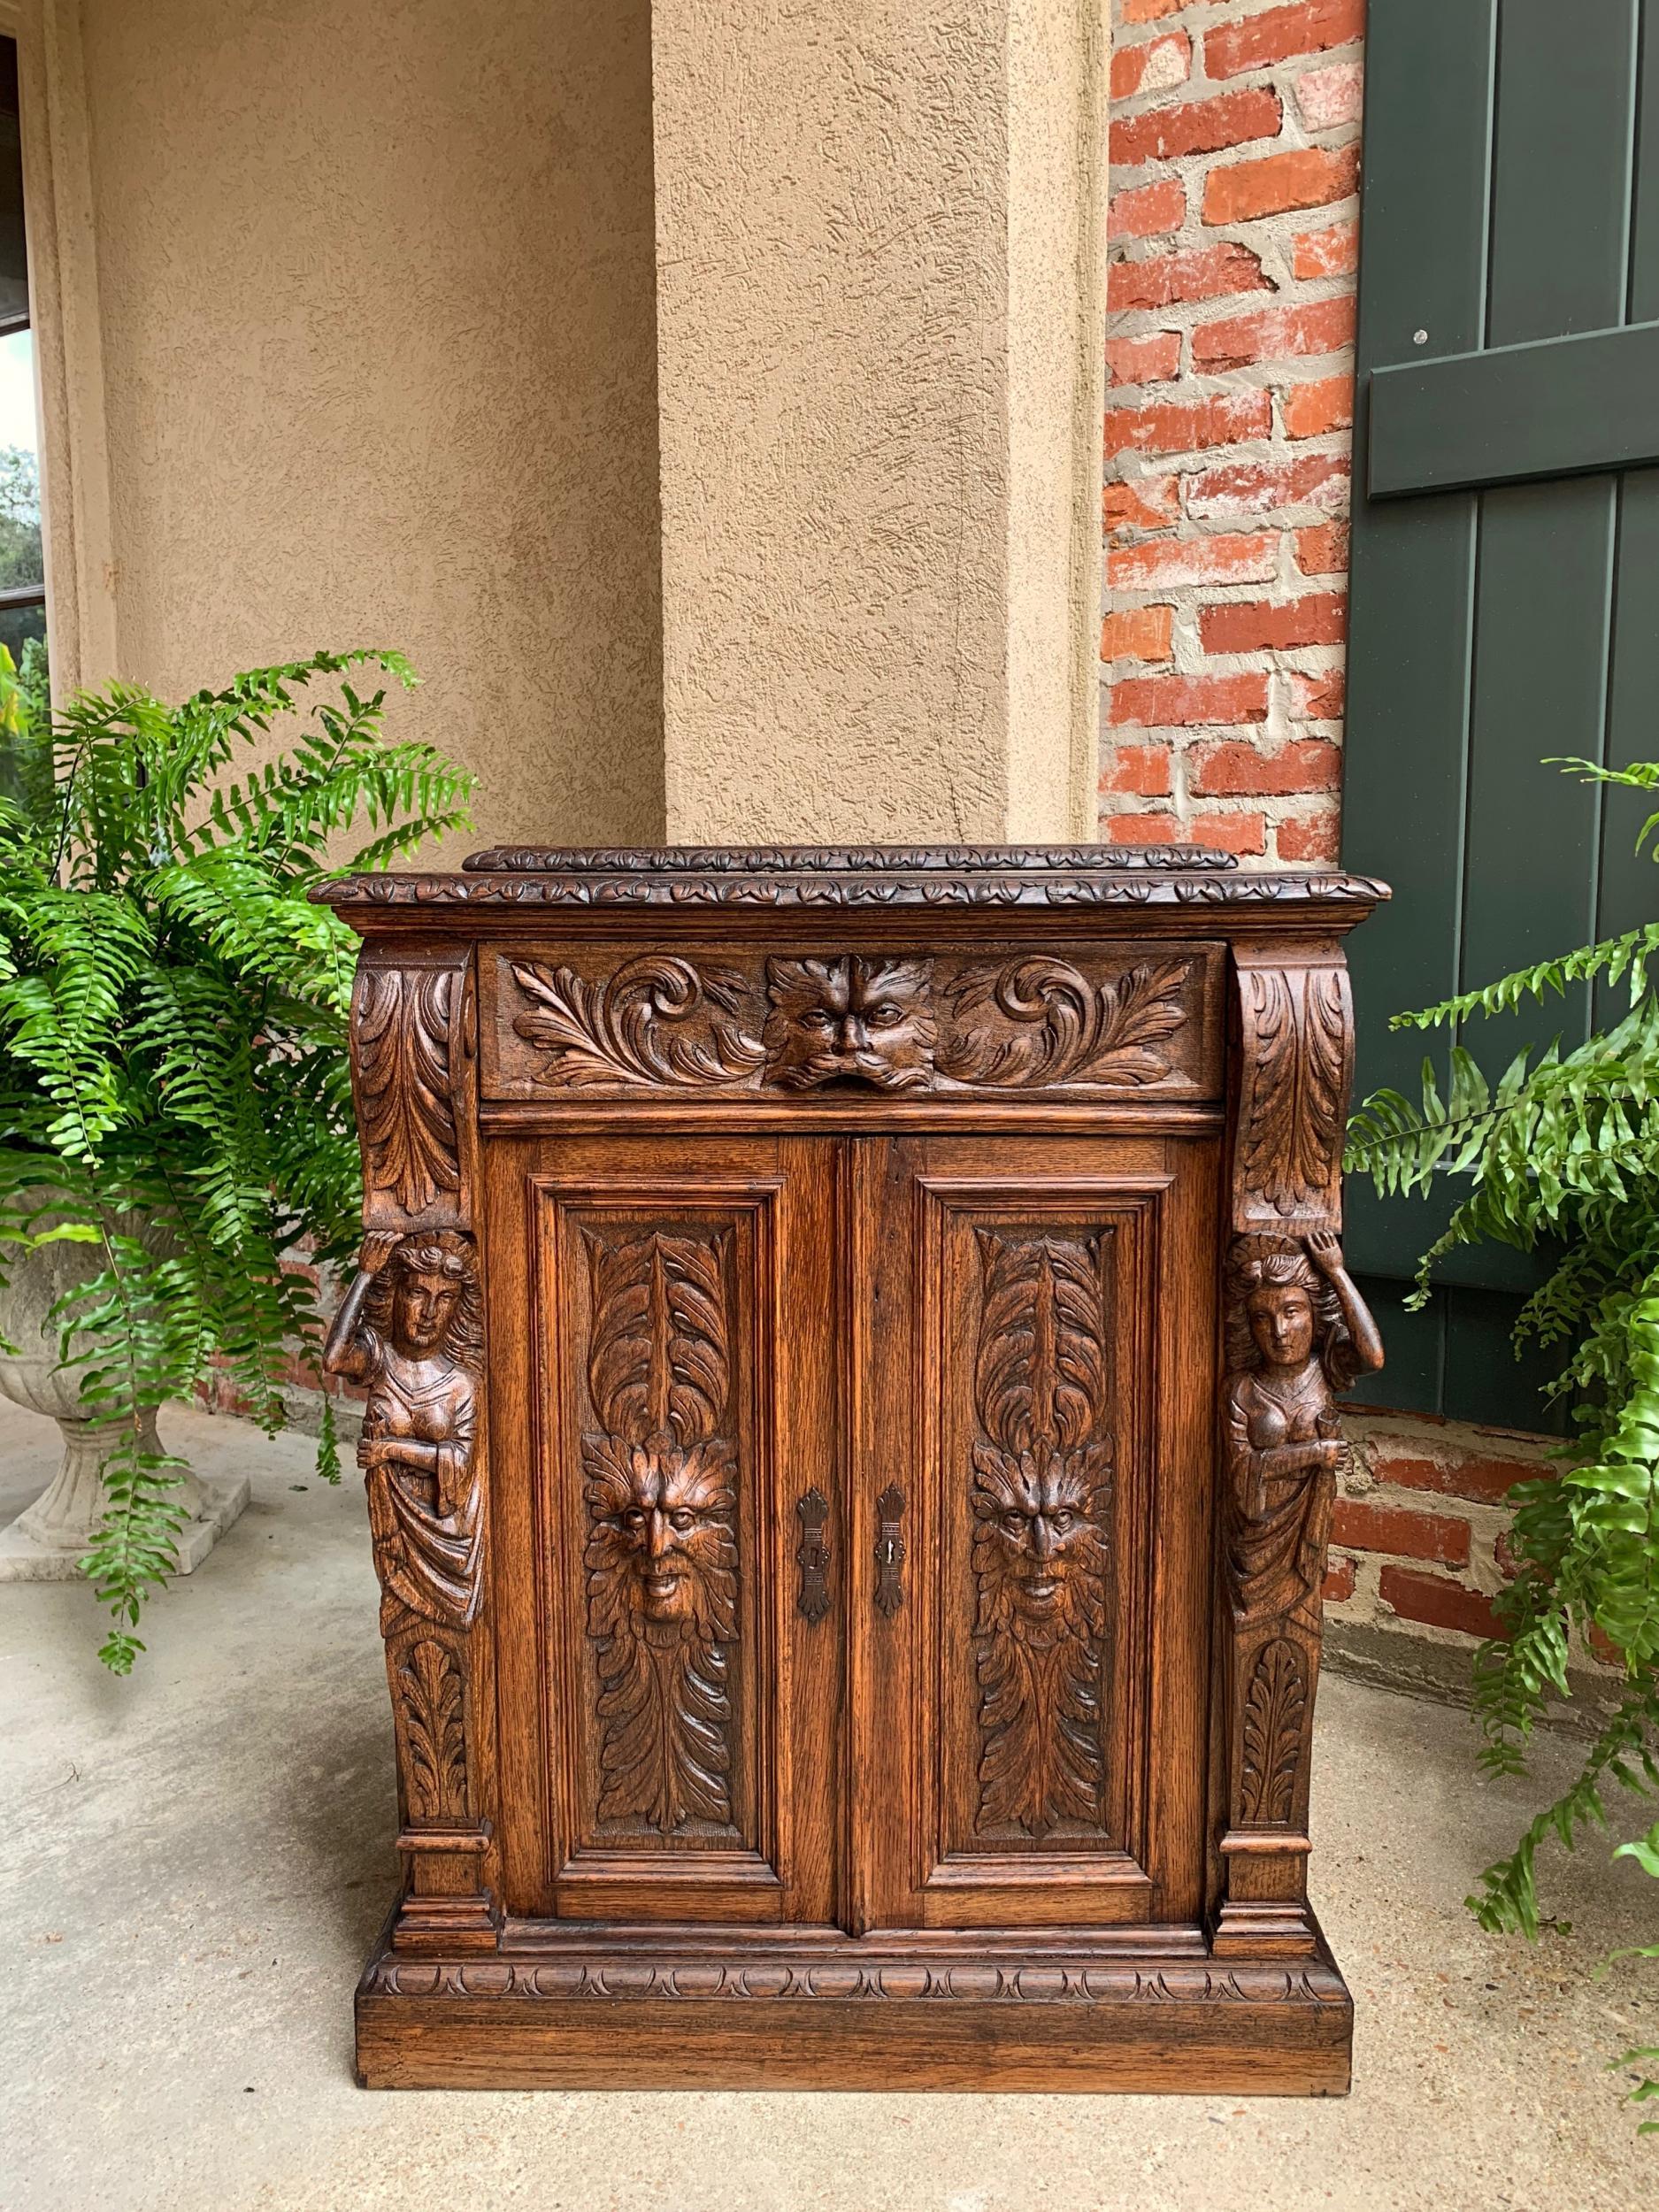 Petite antique French carved oak cabinet server table renaissance server lion

~Direct from France~
~Outstanding carvings throughout this beautiful cabinet, presented in a versatile smaller size, perfect for just about any room!~
~Cabinet top